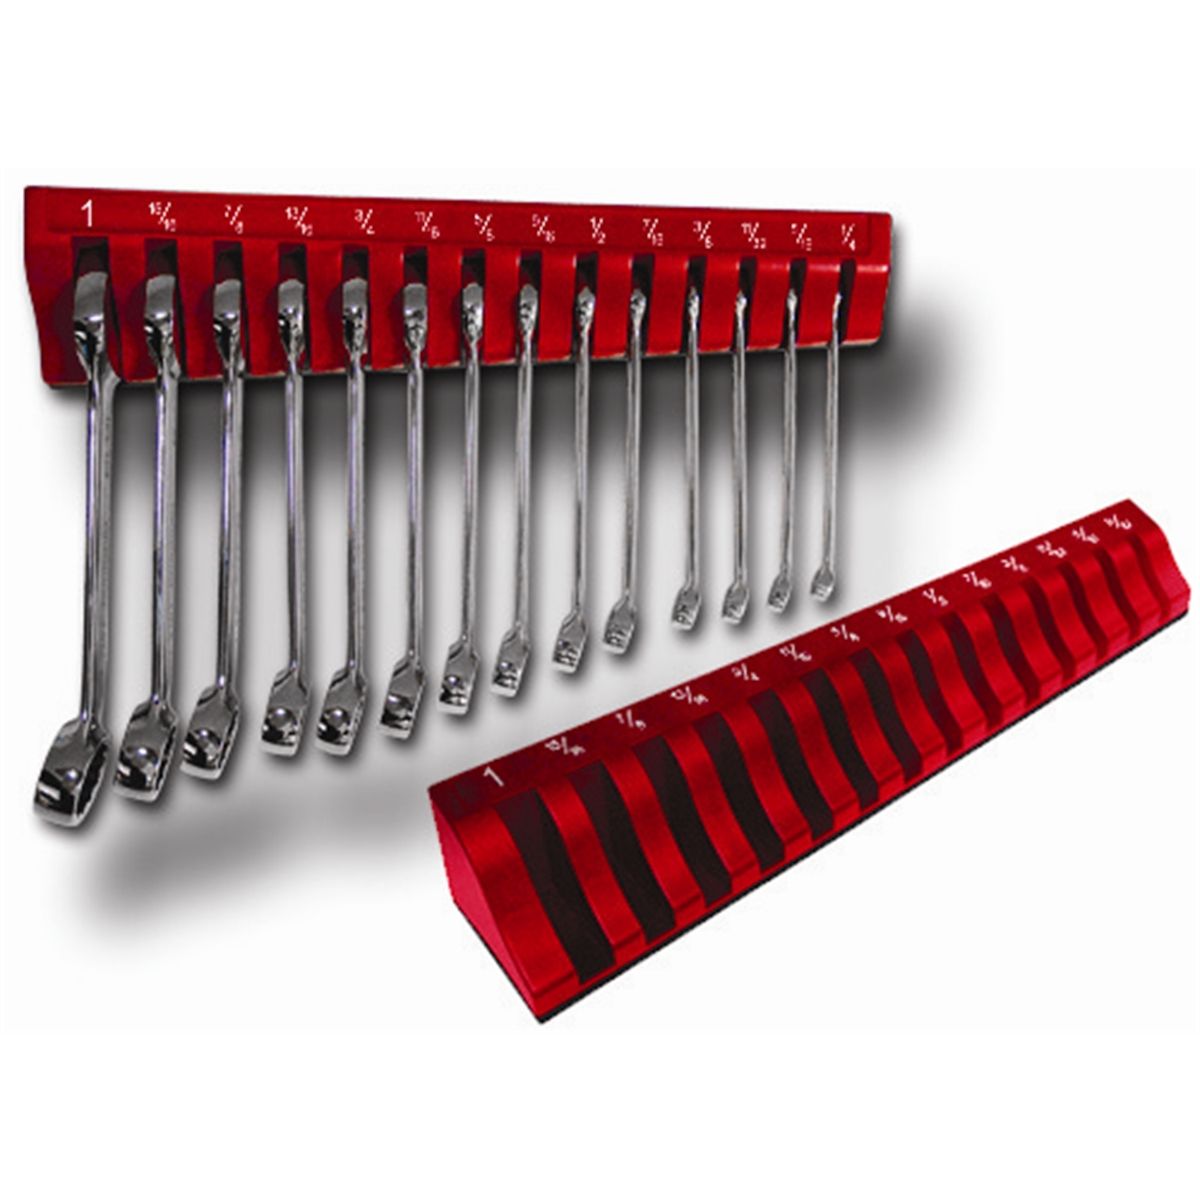 Wrench Organizer - TWO Holds up to 14 wrenches each 